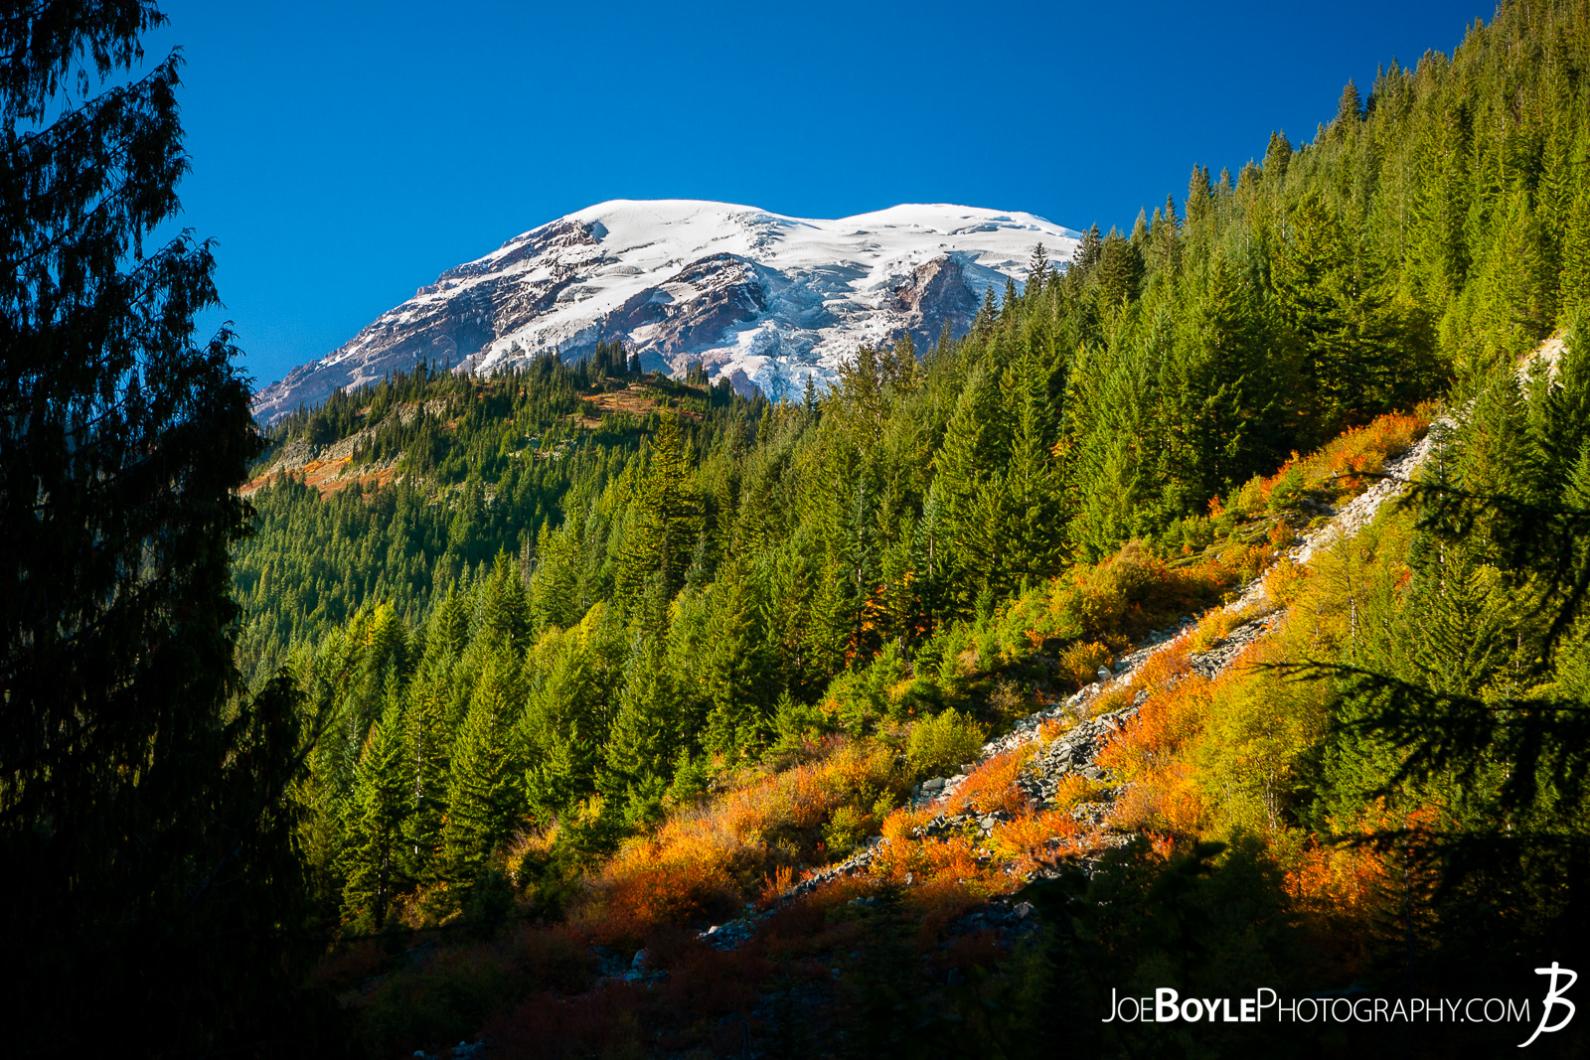 On our way to the Paradise River Campground we were able to see the sunset on Mount Rainier and the few trees and bushes that were already turning fire red and orange for the approaching Autumn season